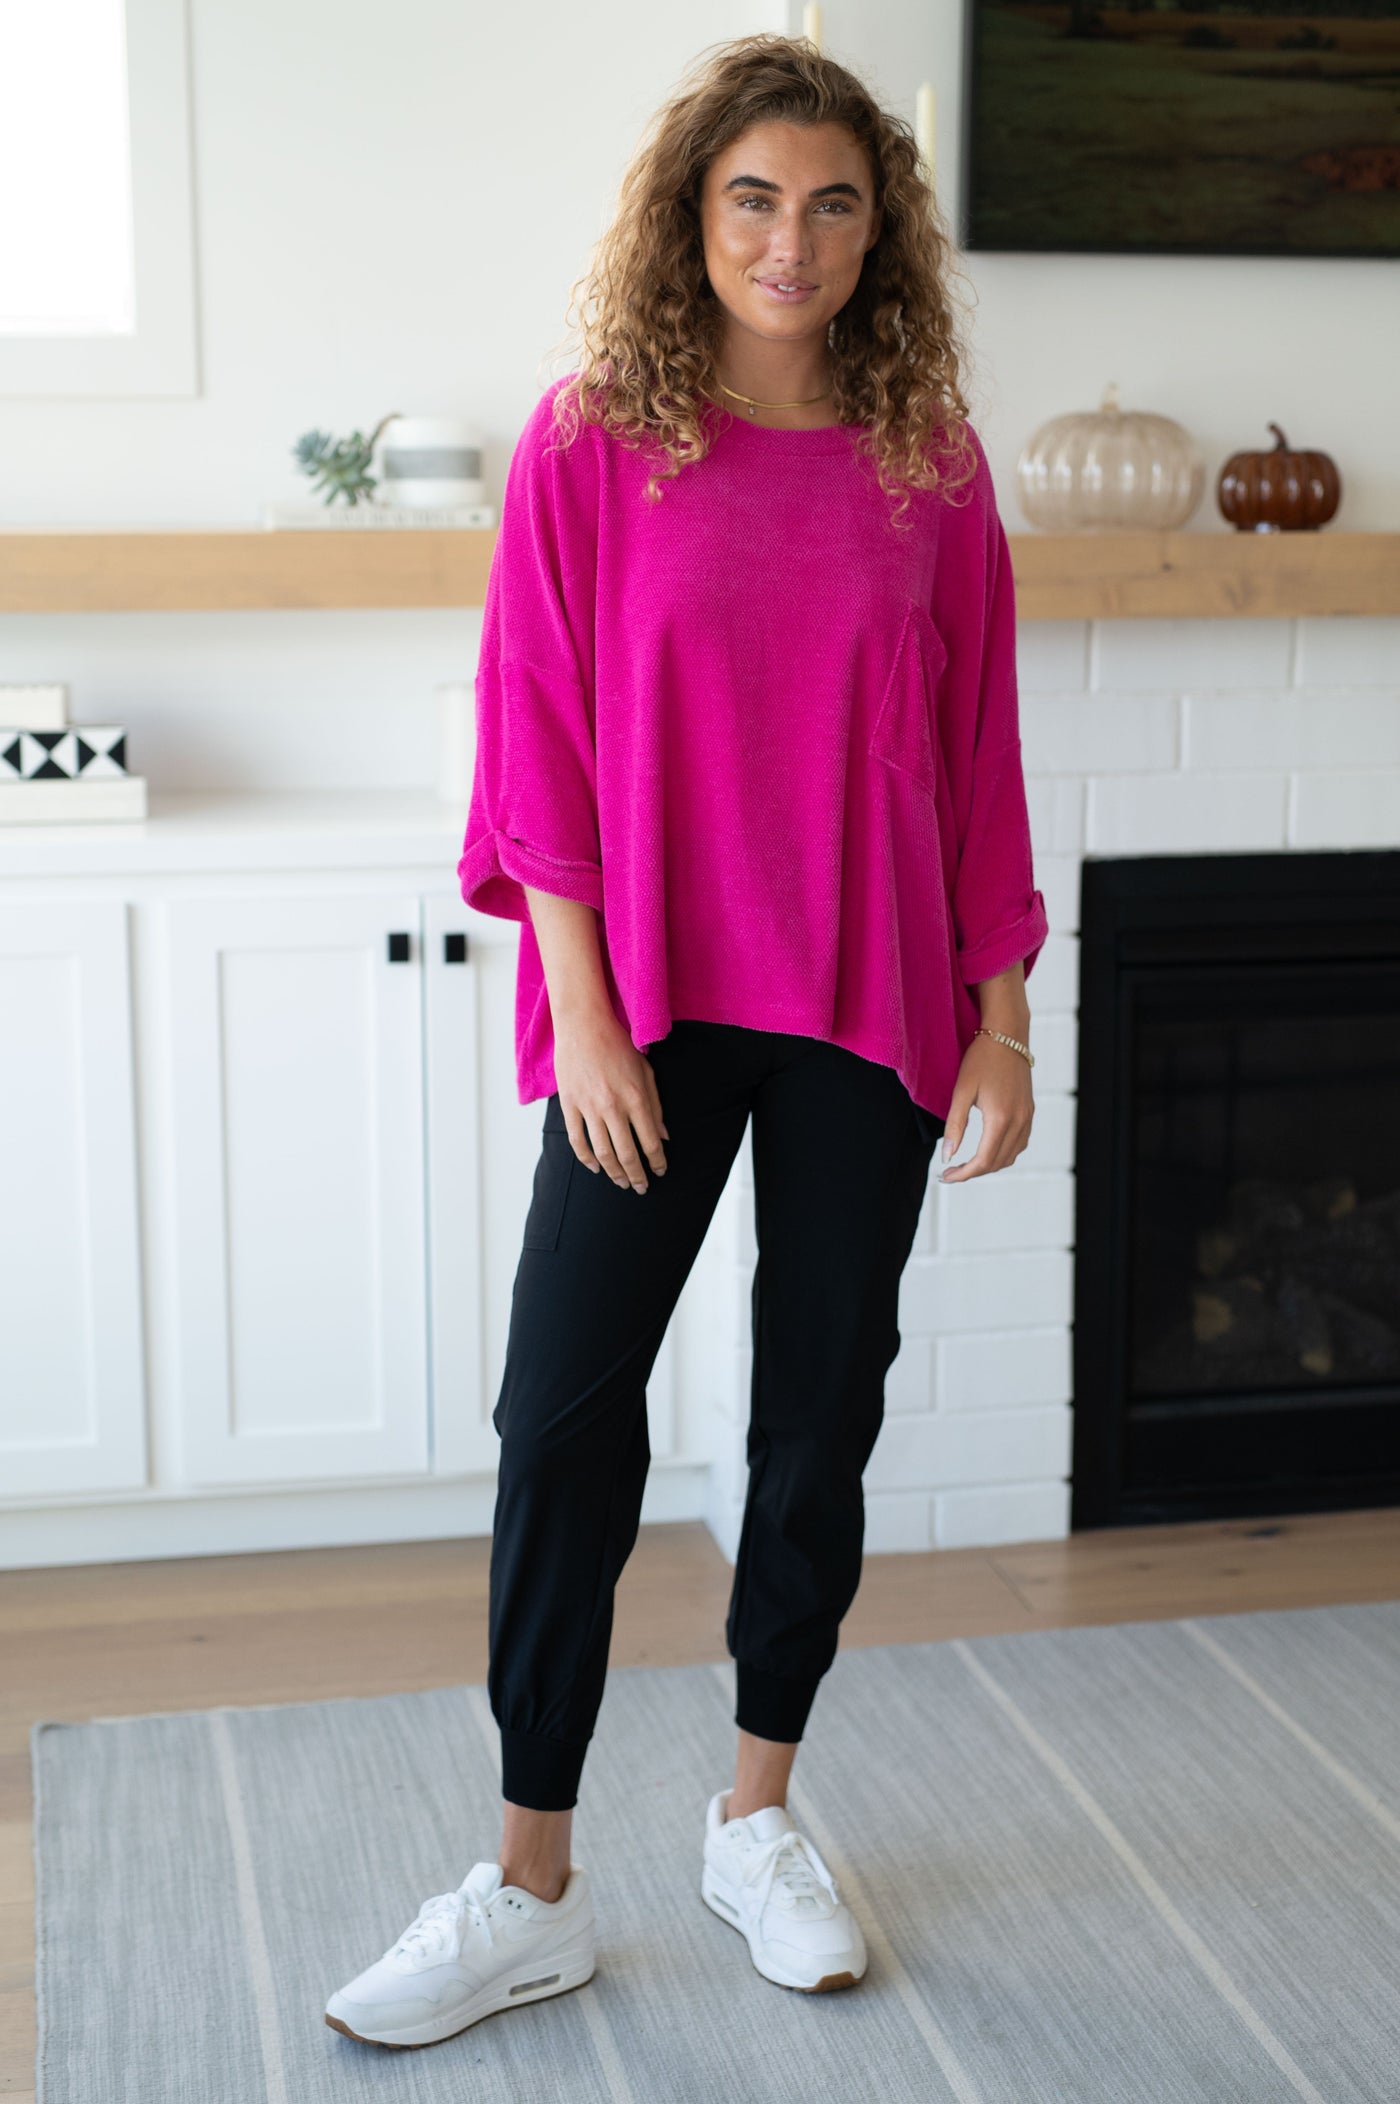 Wrap yourself in comfort with the Pink Thoughts Chenille Blouse. Featuring a cozy chenille knit, dropped shoulder